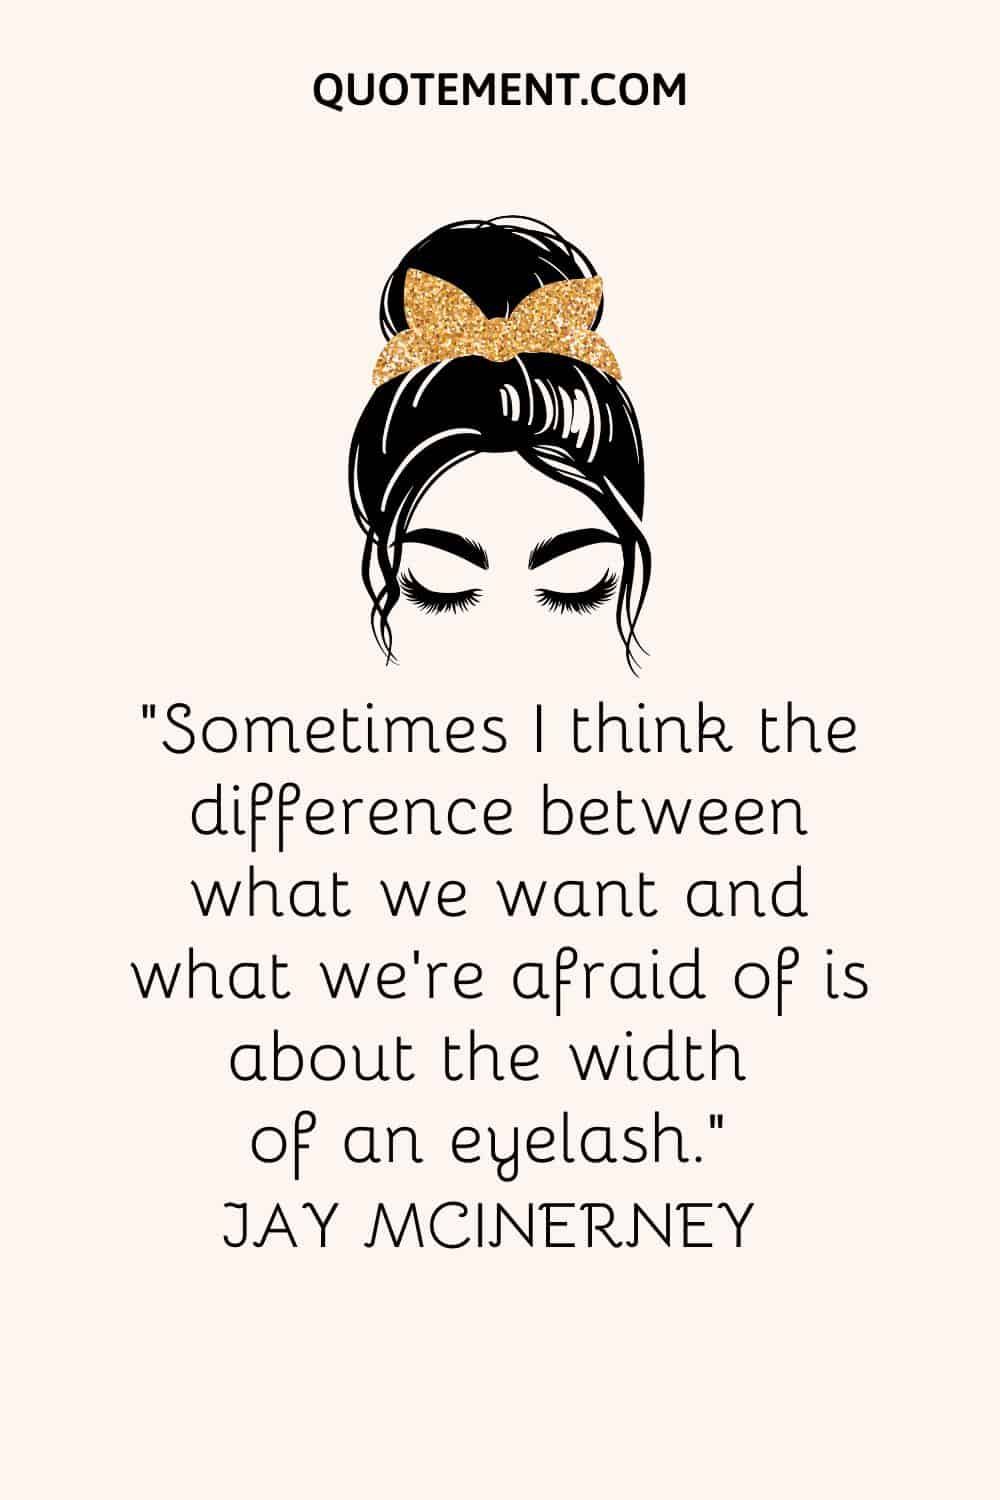 Sometimes I think the difference between what we want and what we’re afraid of is about the width of an eyelash